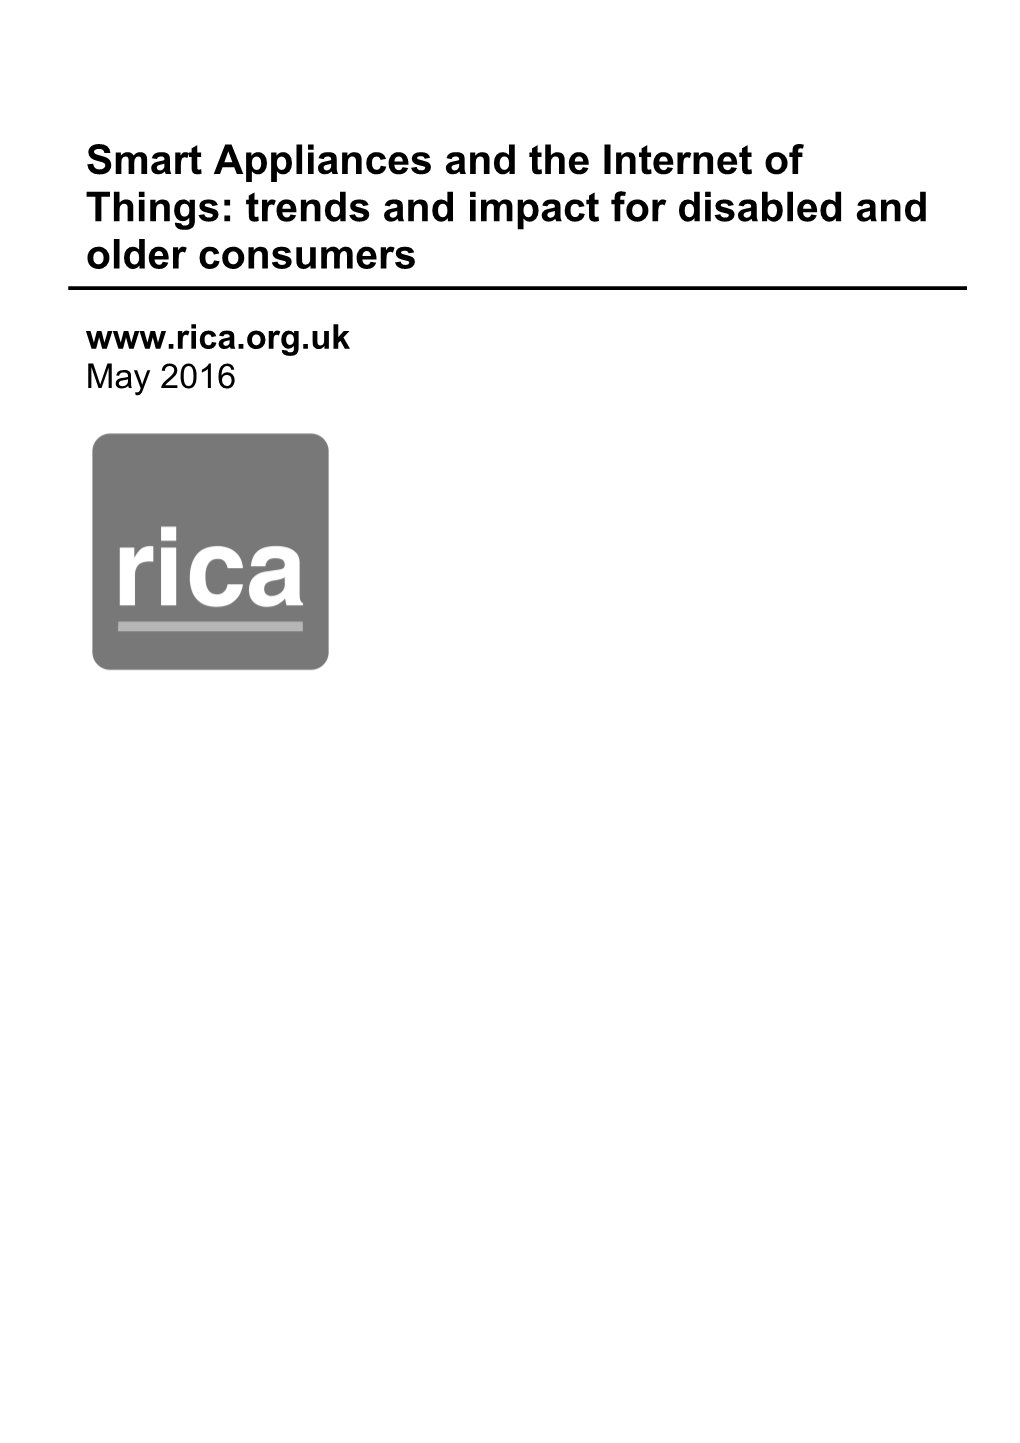 Smart Appliances and the Internet of Things: Trends and Impact for Disabled and Older